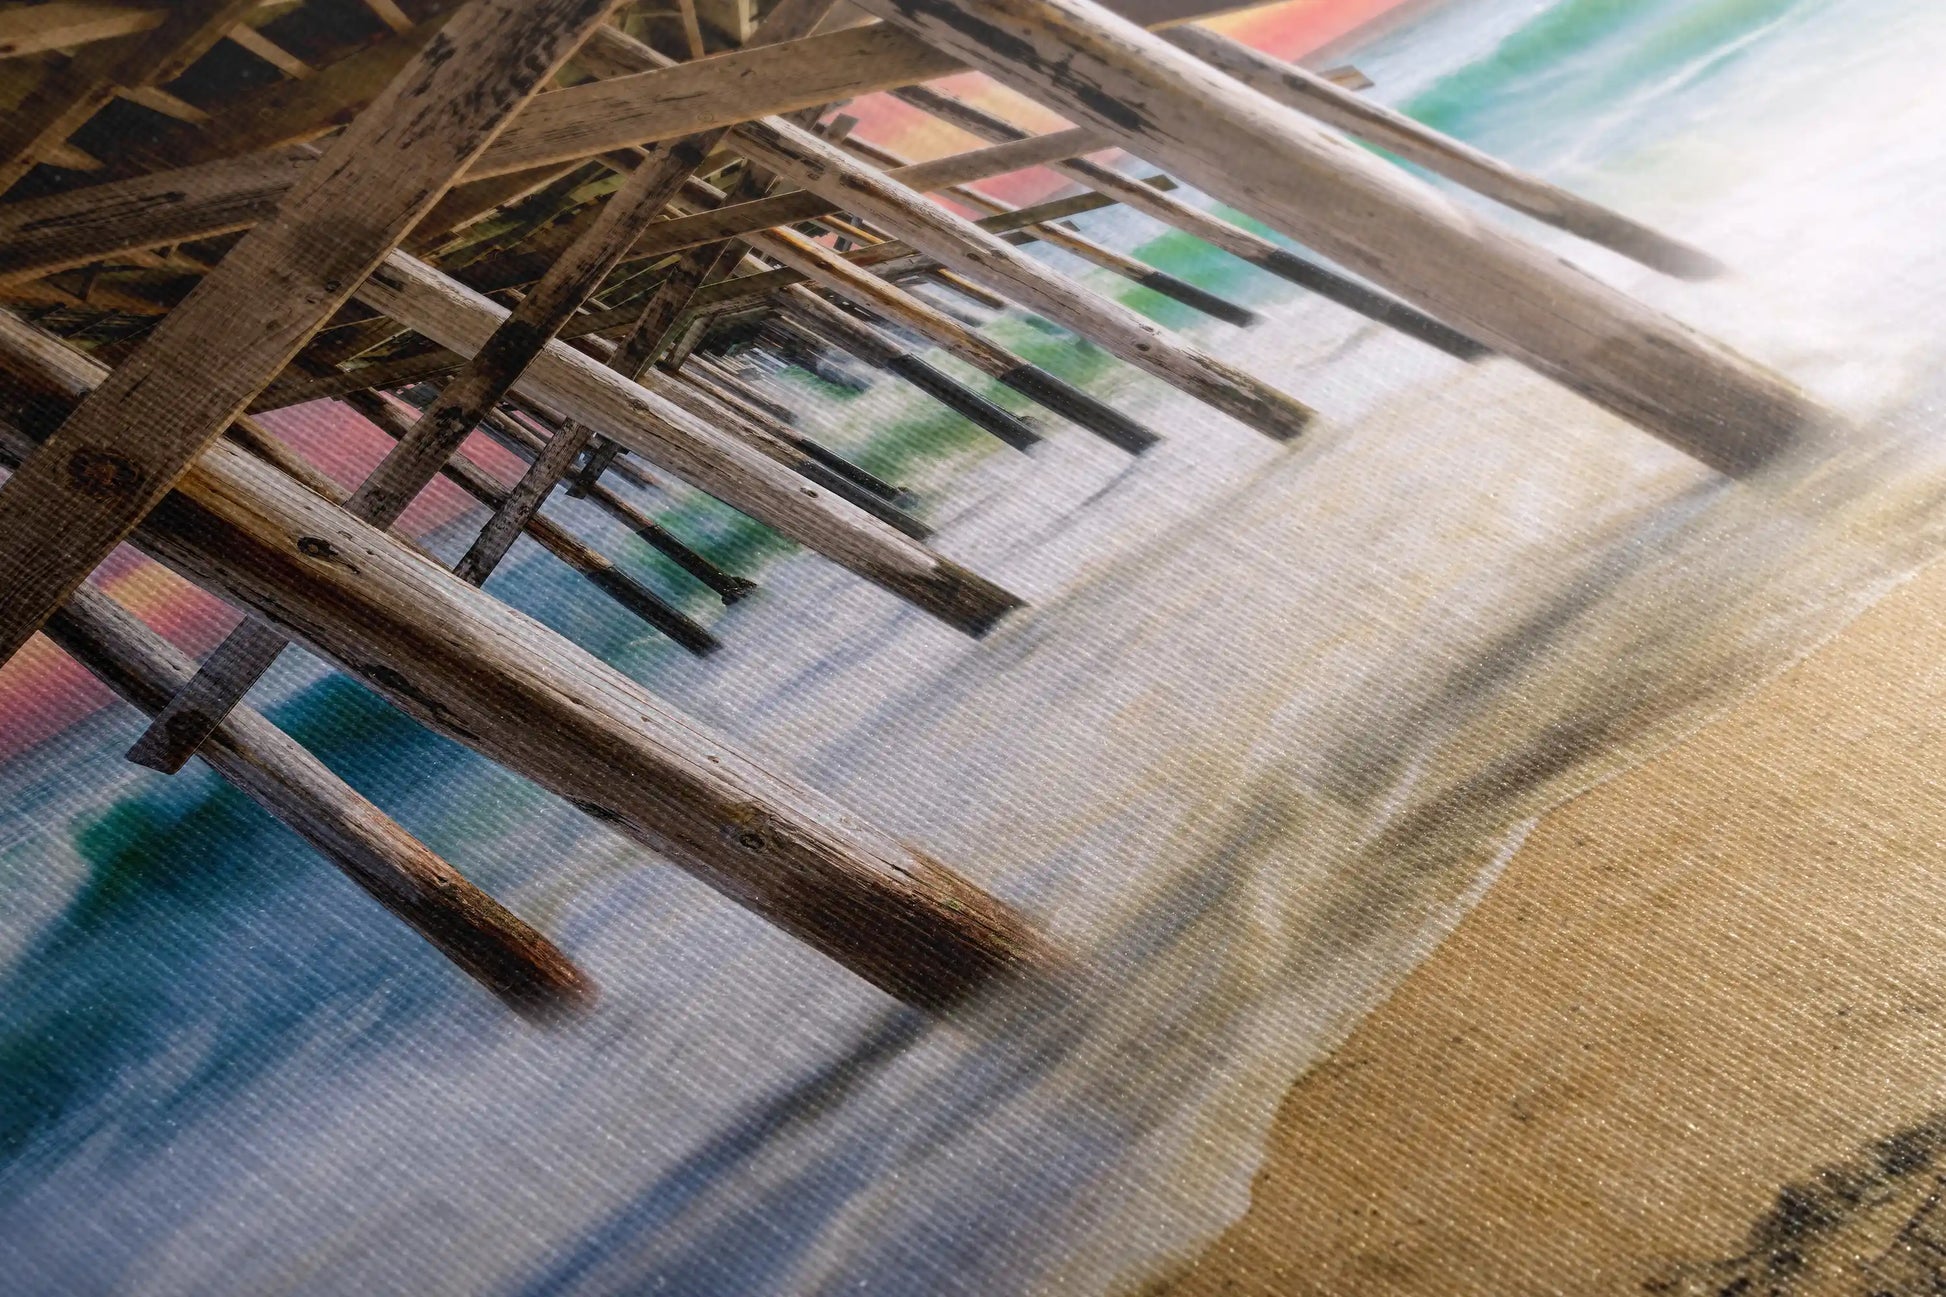 Detailed shot of canvas texture with a part of the image showing Under Balboa Pier at sunset, focusing on the wooden structure and water reflection.